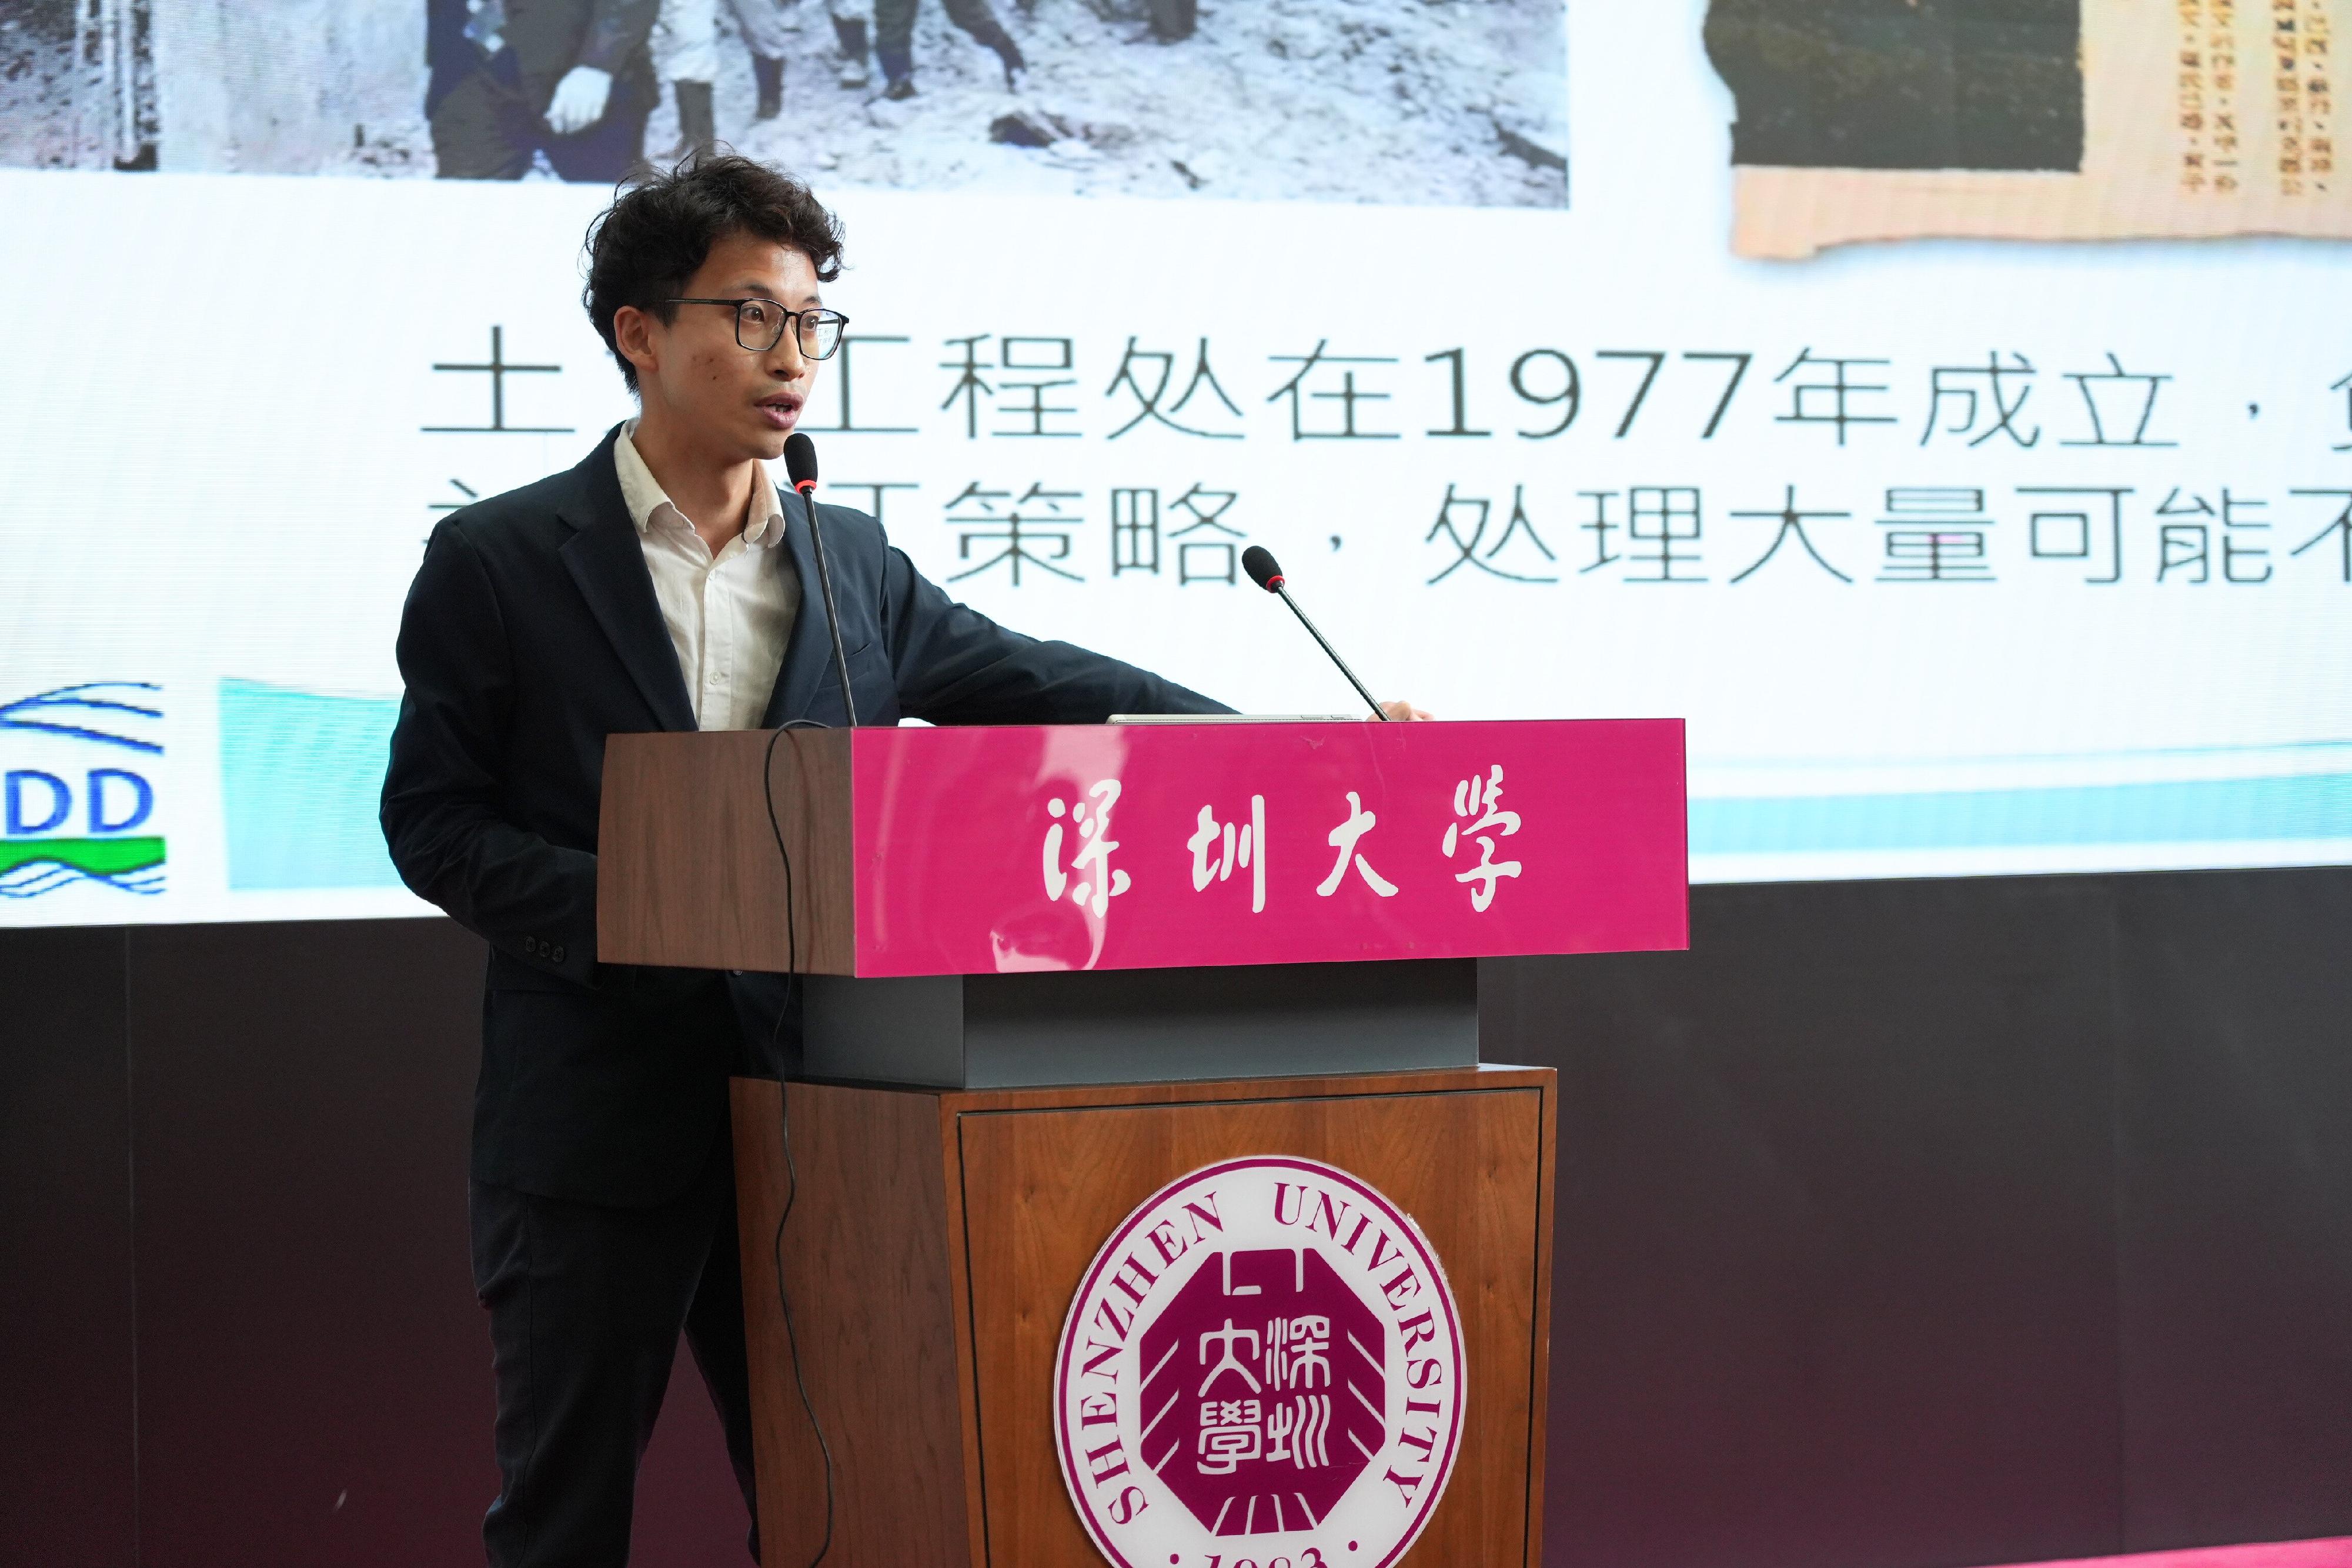 The Civil Service Bureau (CSB) led a delegation for the first time, together with representatives from the Civil Aviation Department, Civil Engineering and Development Department (CEDD), Highways Department and Leisure and Cultural Services Department, to visit the campuses of Shenzhen University, Jinan University and Huaqiao University in Shenzhen, Guangzhou, Xiamen, and Quanzhou respectively, to conduct recruitment talks for three consecutive days starting today (May 27). Photo shows CEDD Geotechnical Engineer Mr Ivan Li introducing to the participating students the work, entry requirements, recruitment processes and other related information of a Geotechnical Engineering Graduate, and answering enquiries.